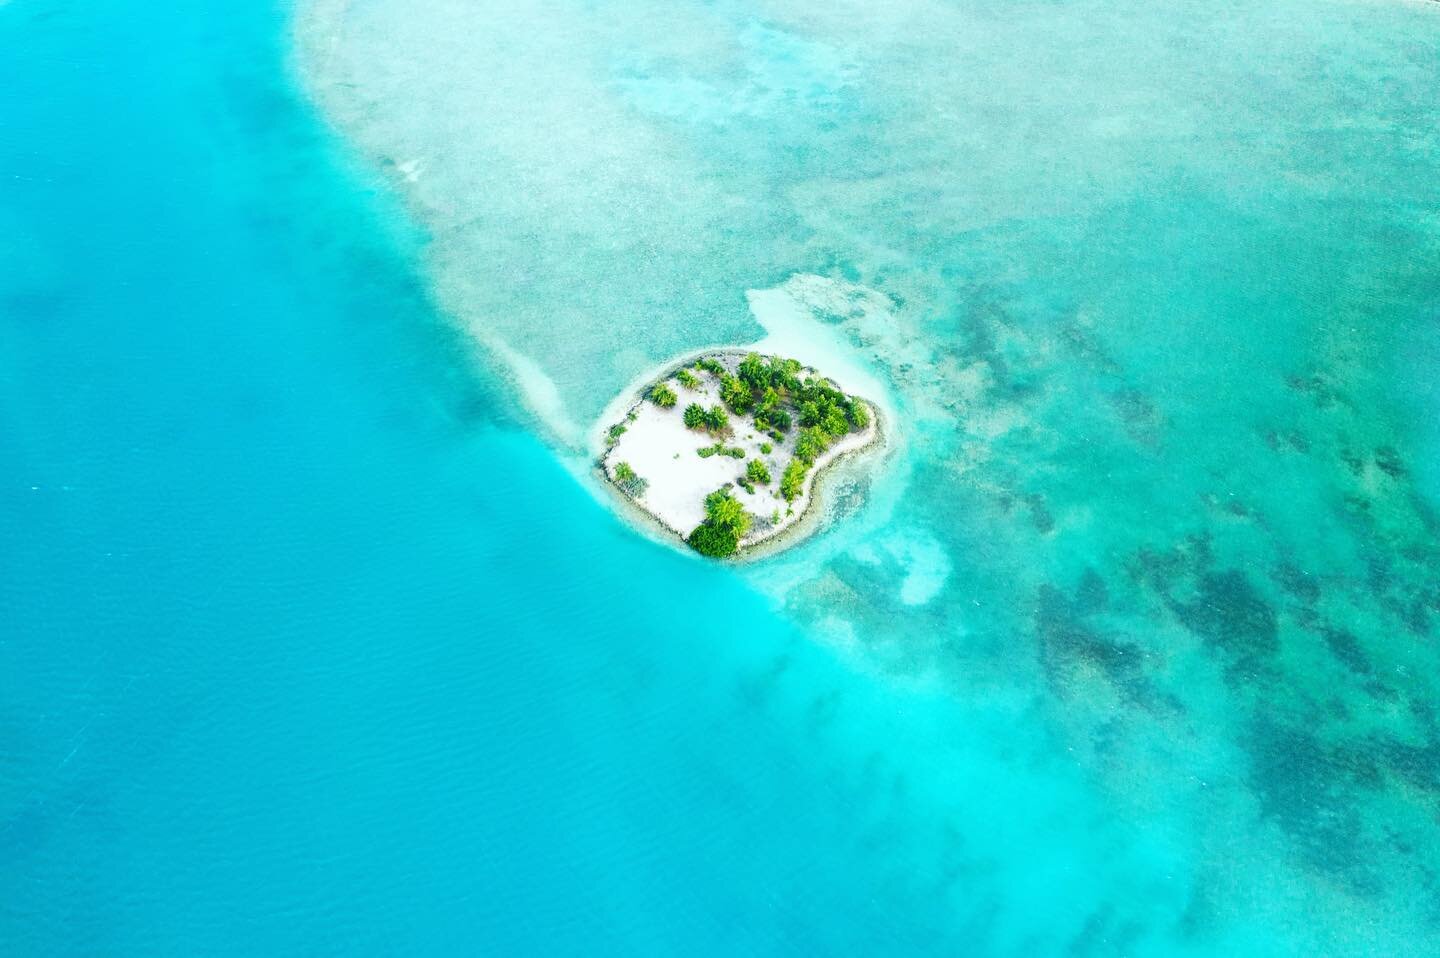 What a cool little slice of 🌎 this was! Almost lost my drone in the ocean for this shot, had to blindly land on the next closest little island and then get dropped off to search for it there, whoops! 

Scheming on my return to TCI hopefully in the n